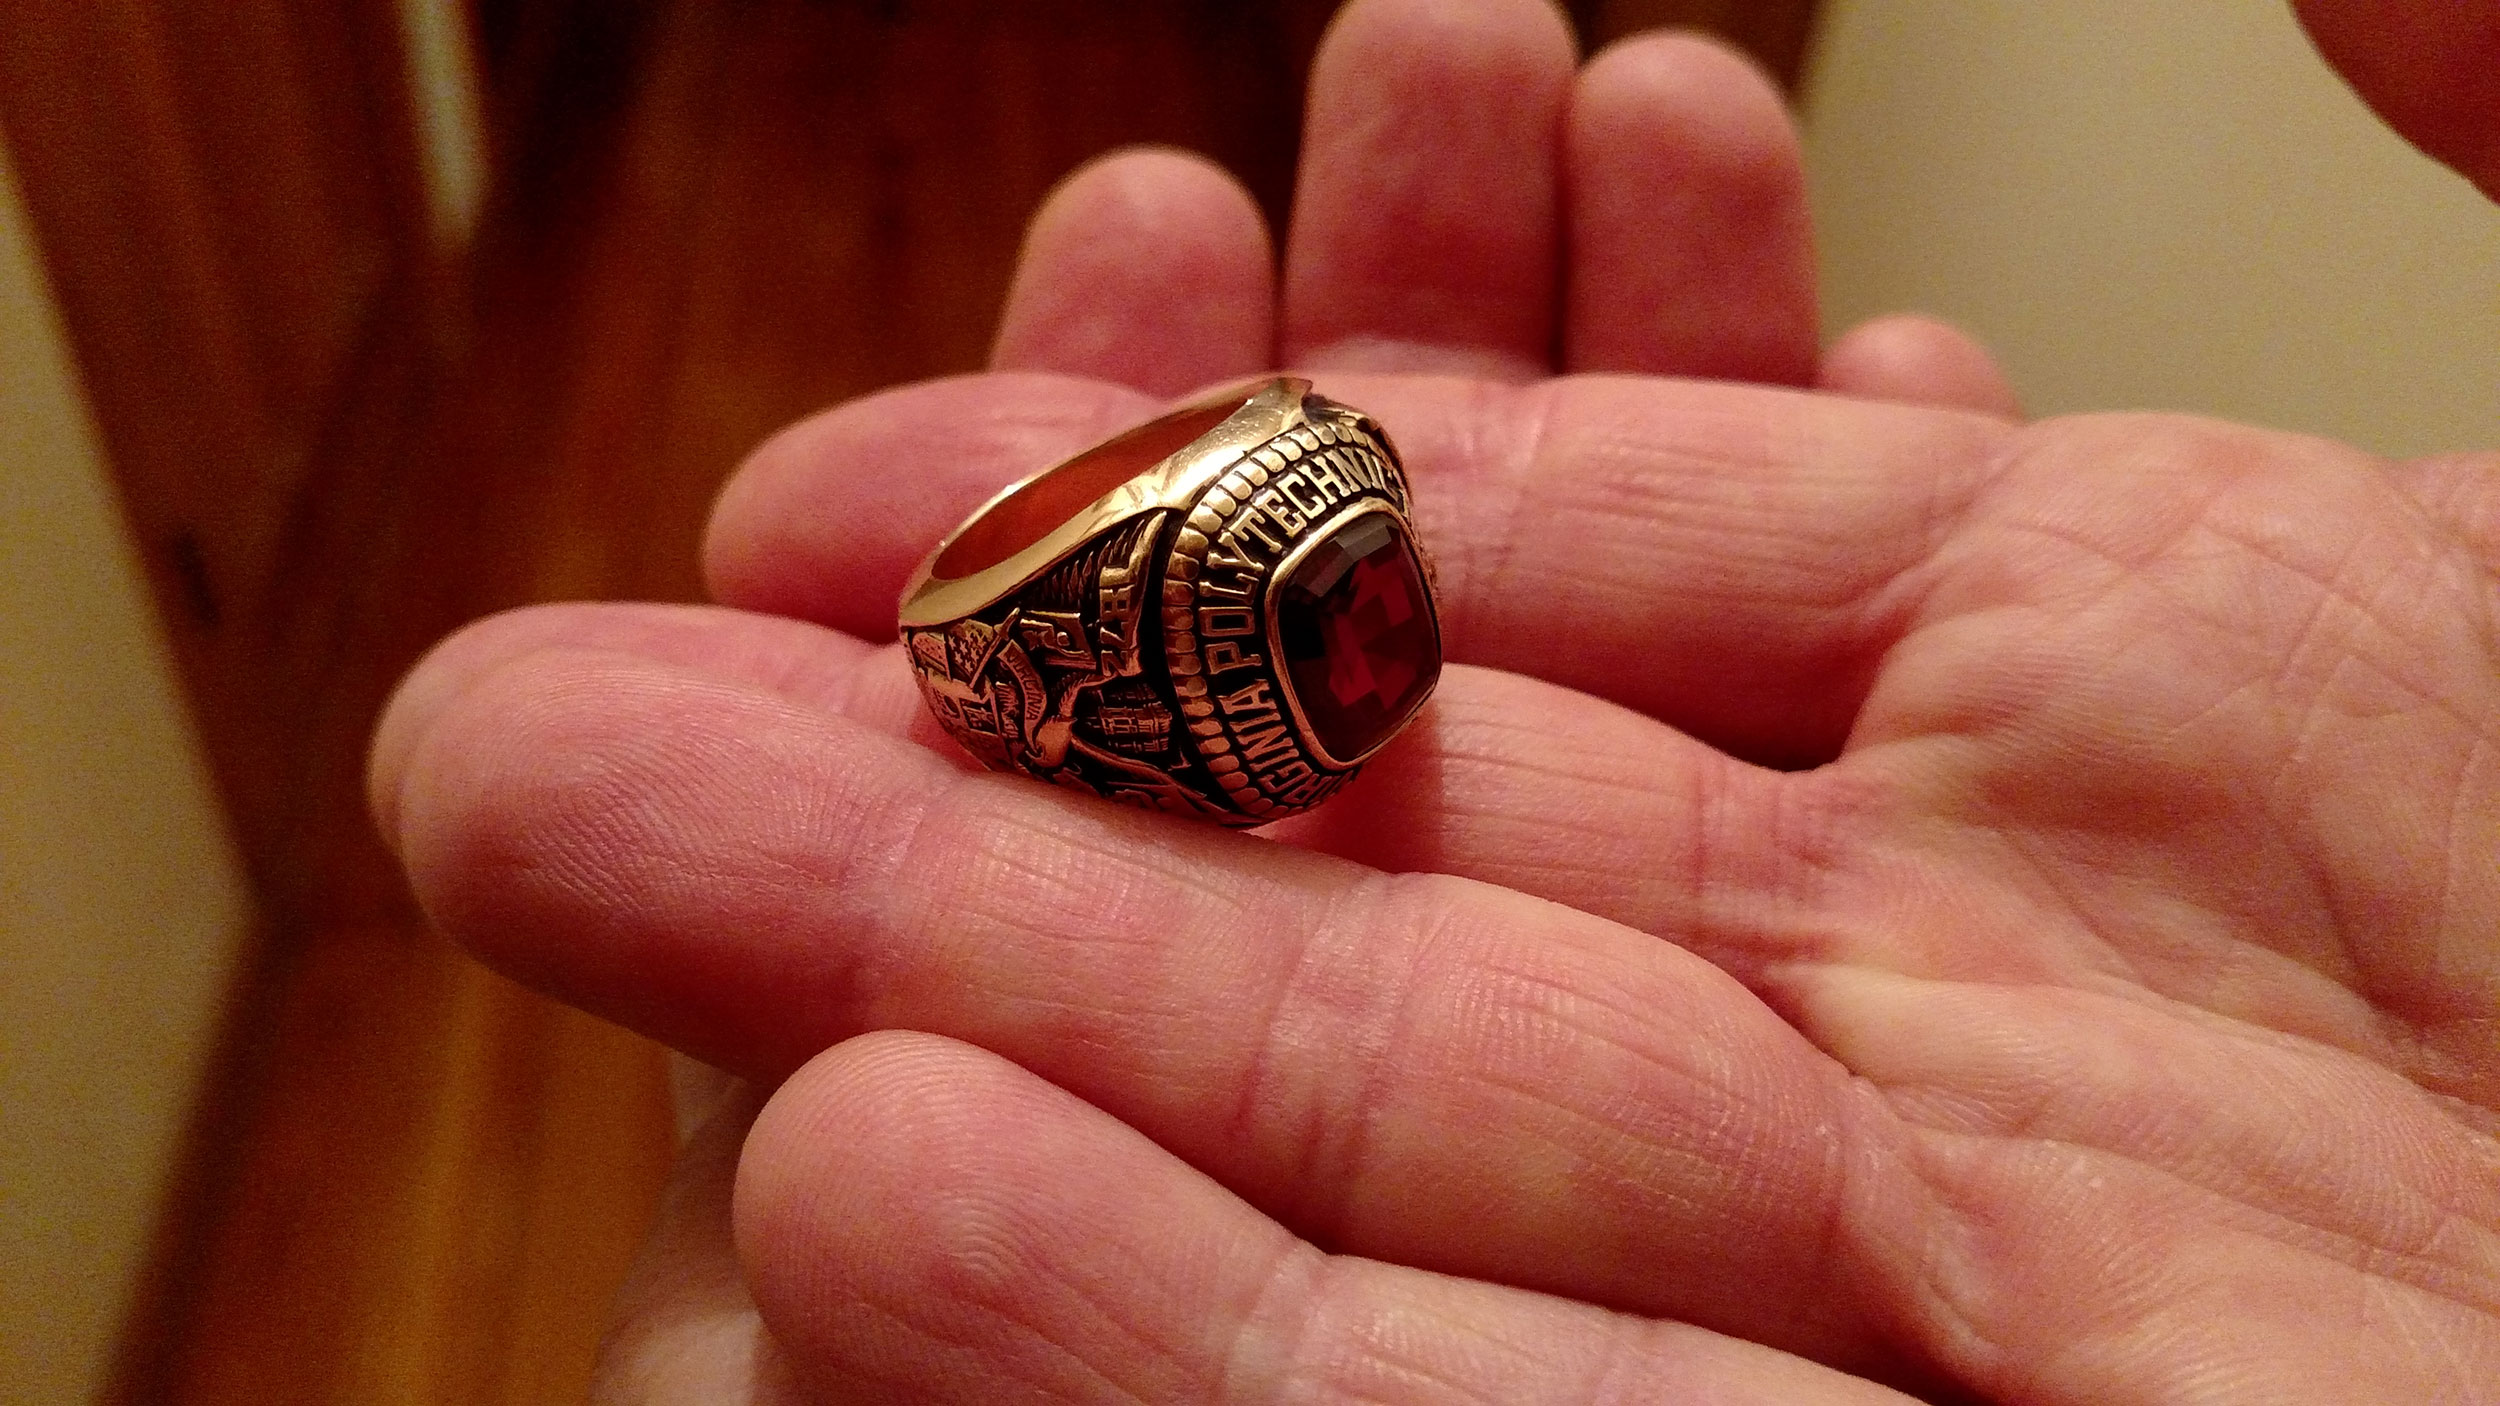 Scott Young's class ring